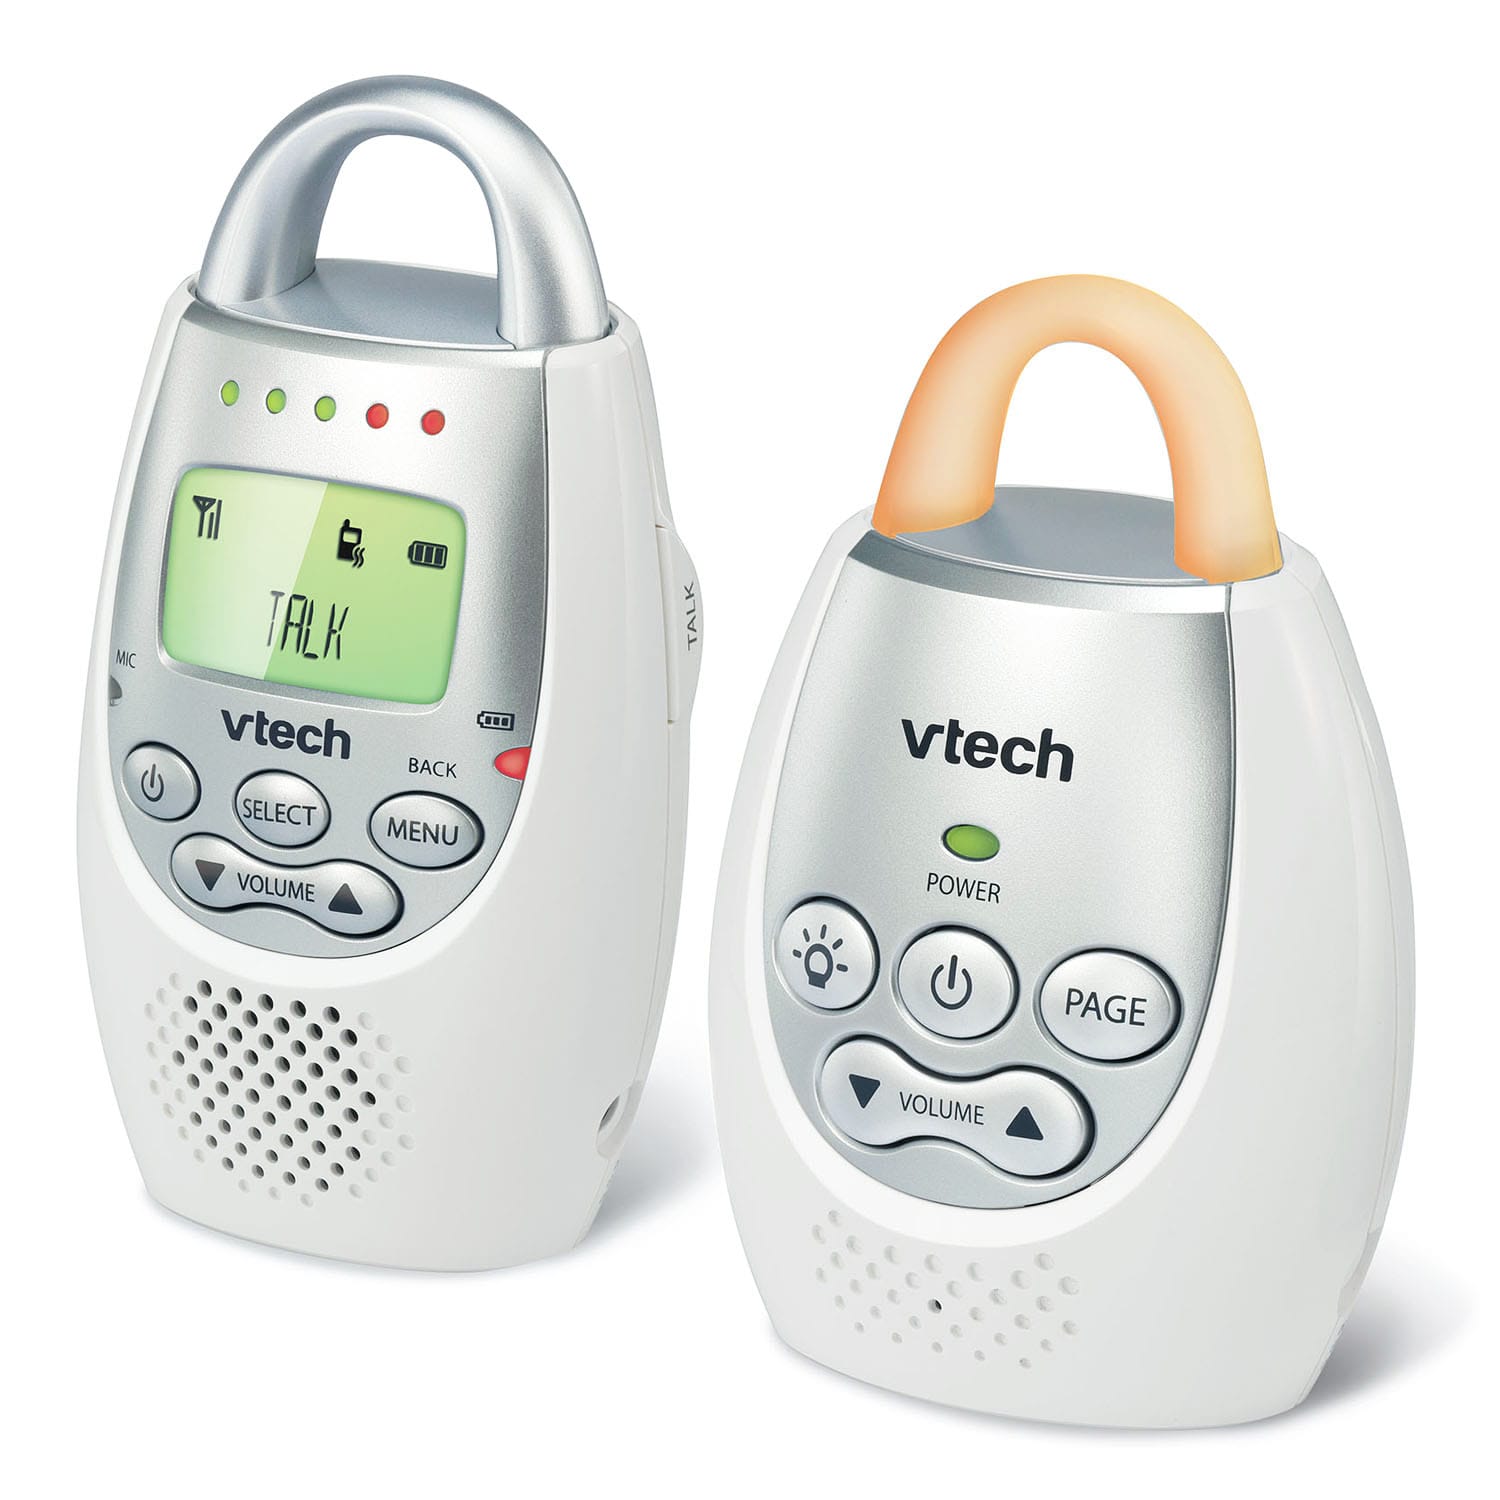 VTech Digital Audio Baby Monitor - with DECT 6.0 digital technology